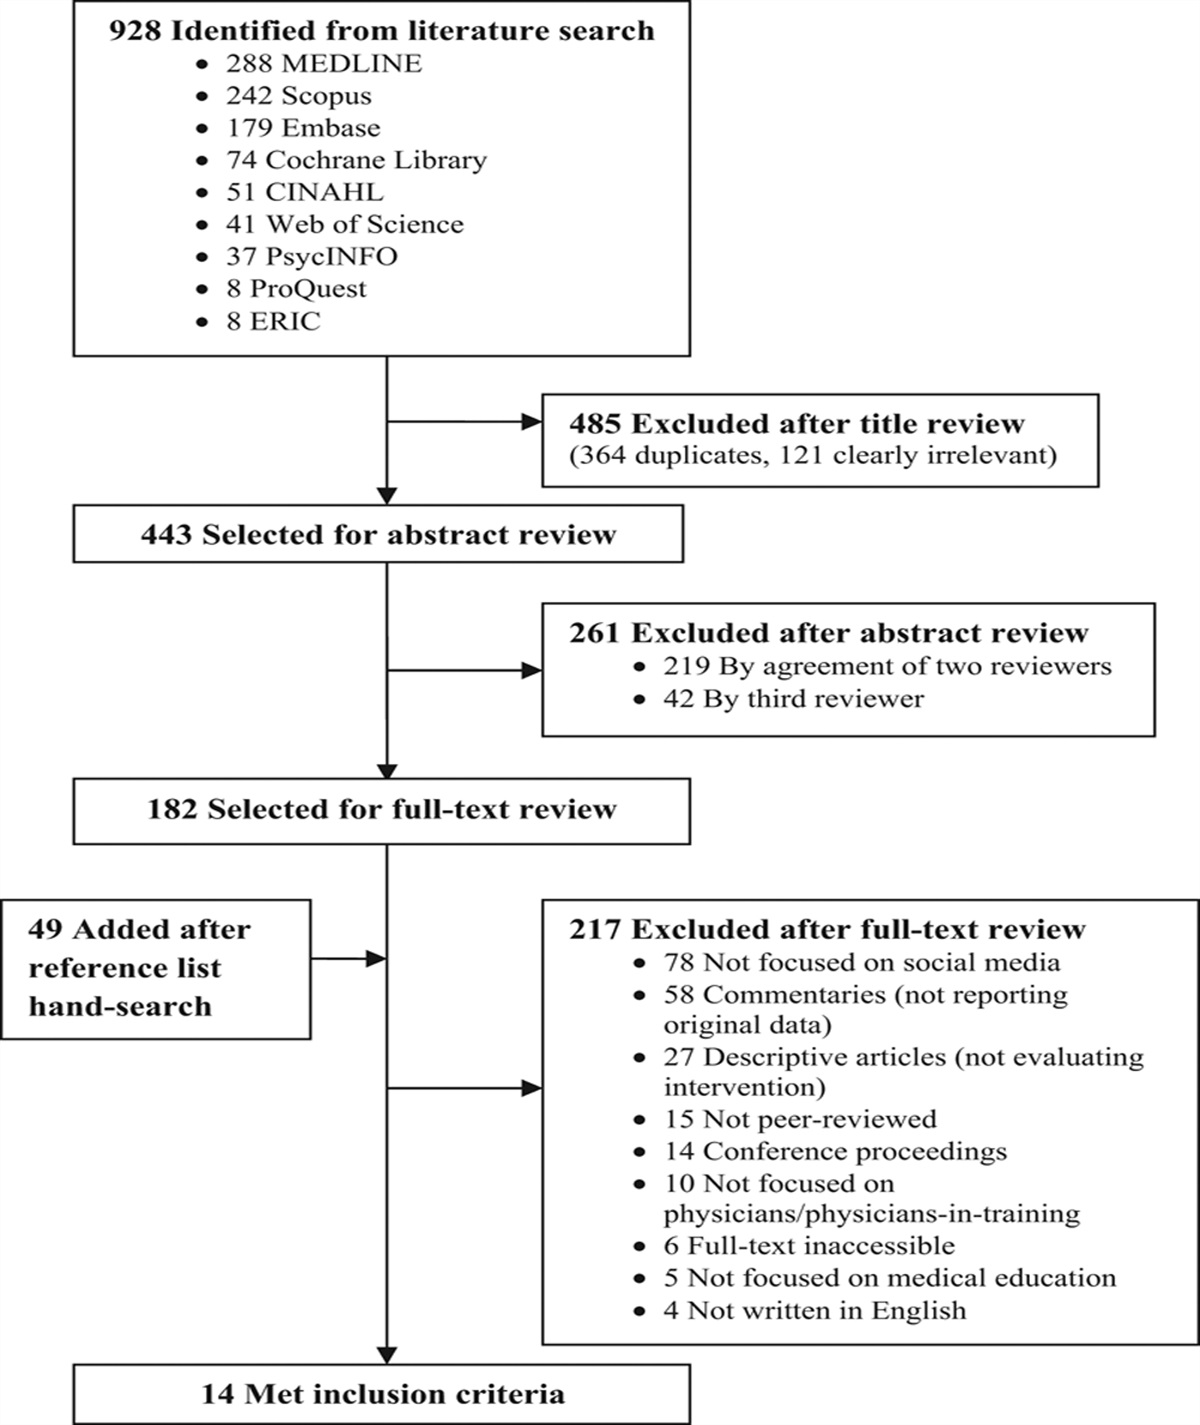 Social Media Use in Medical Education: A Systematic Review